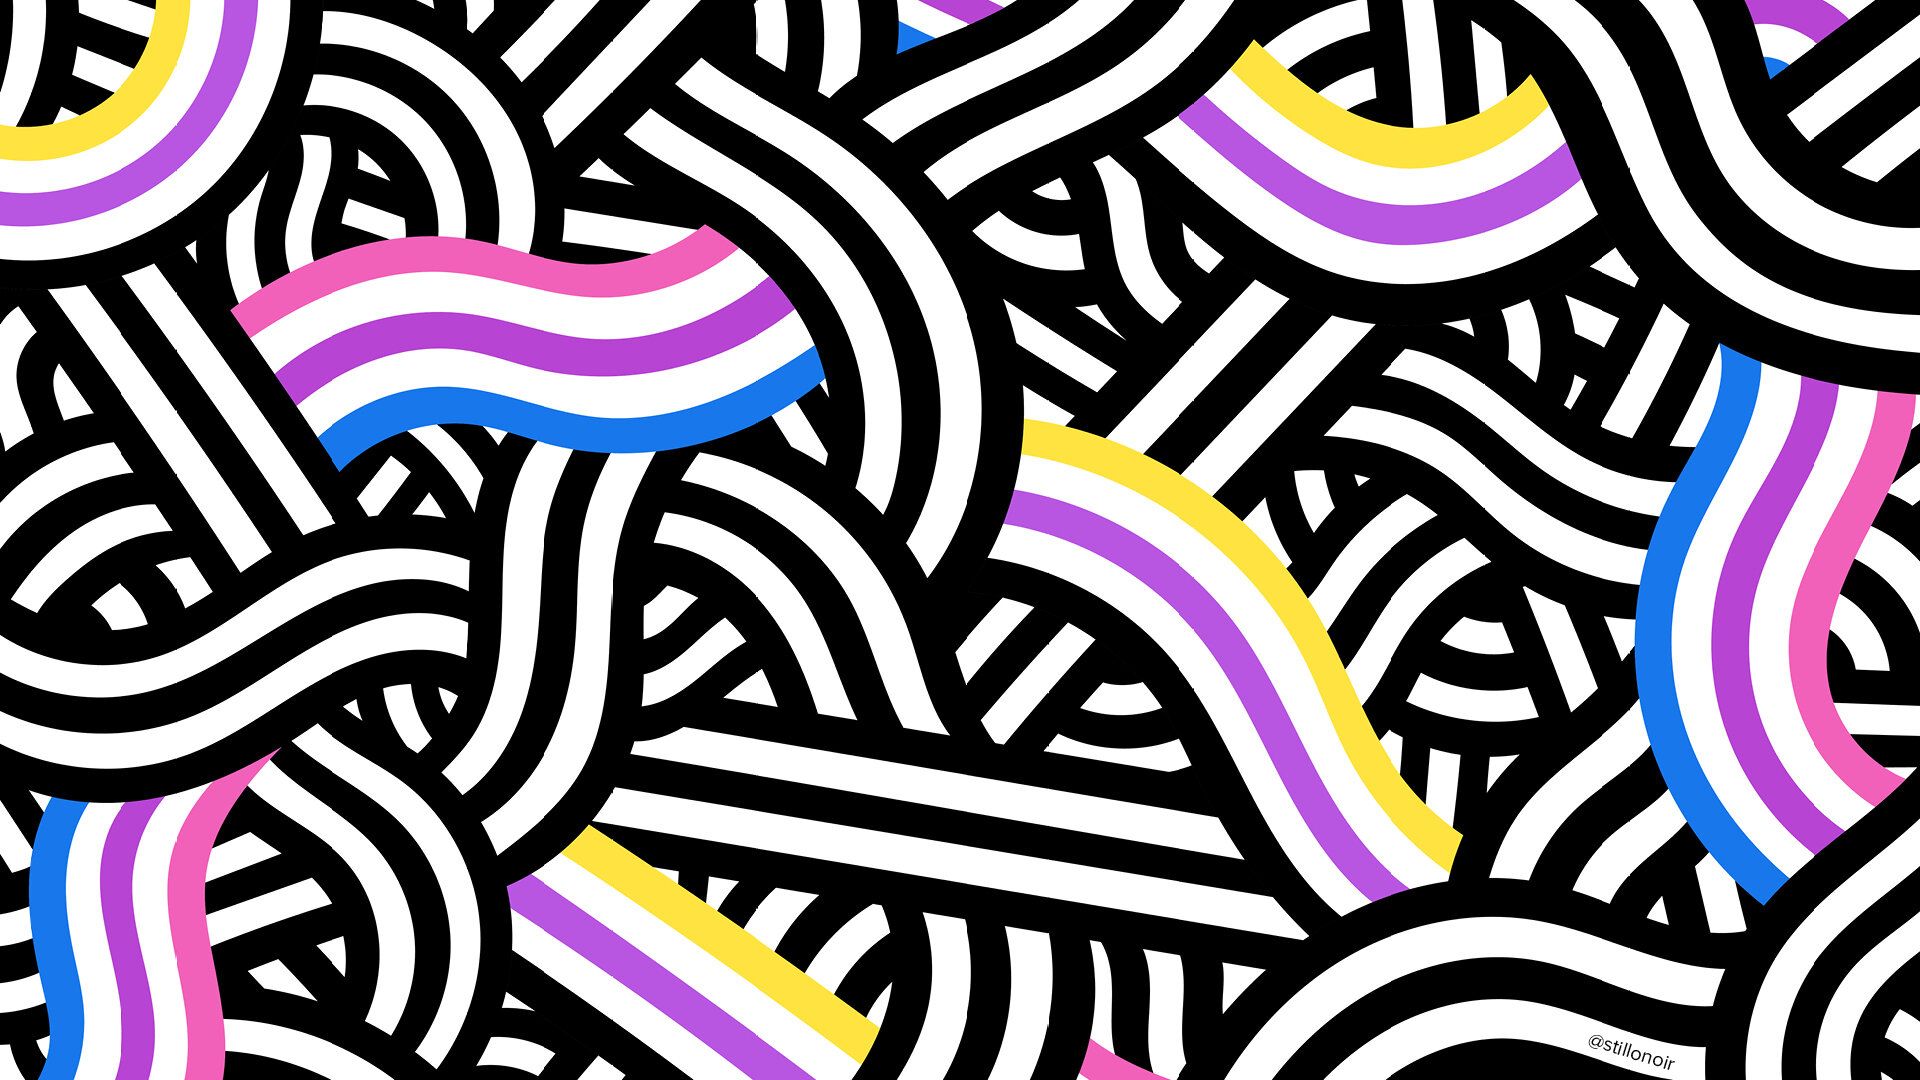 Black and white abstract pattern with the pansexual pride flag - Bisexual